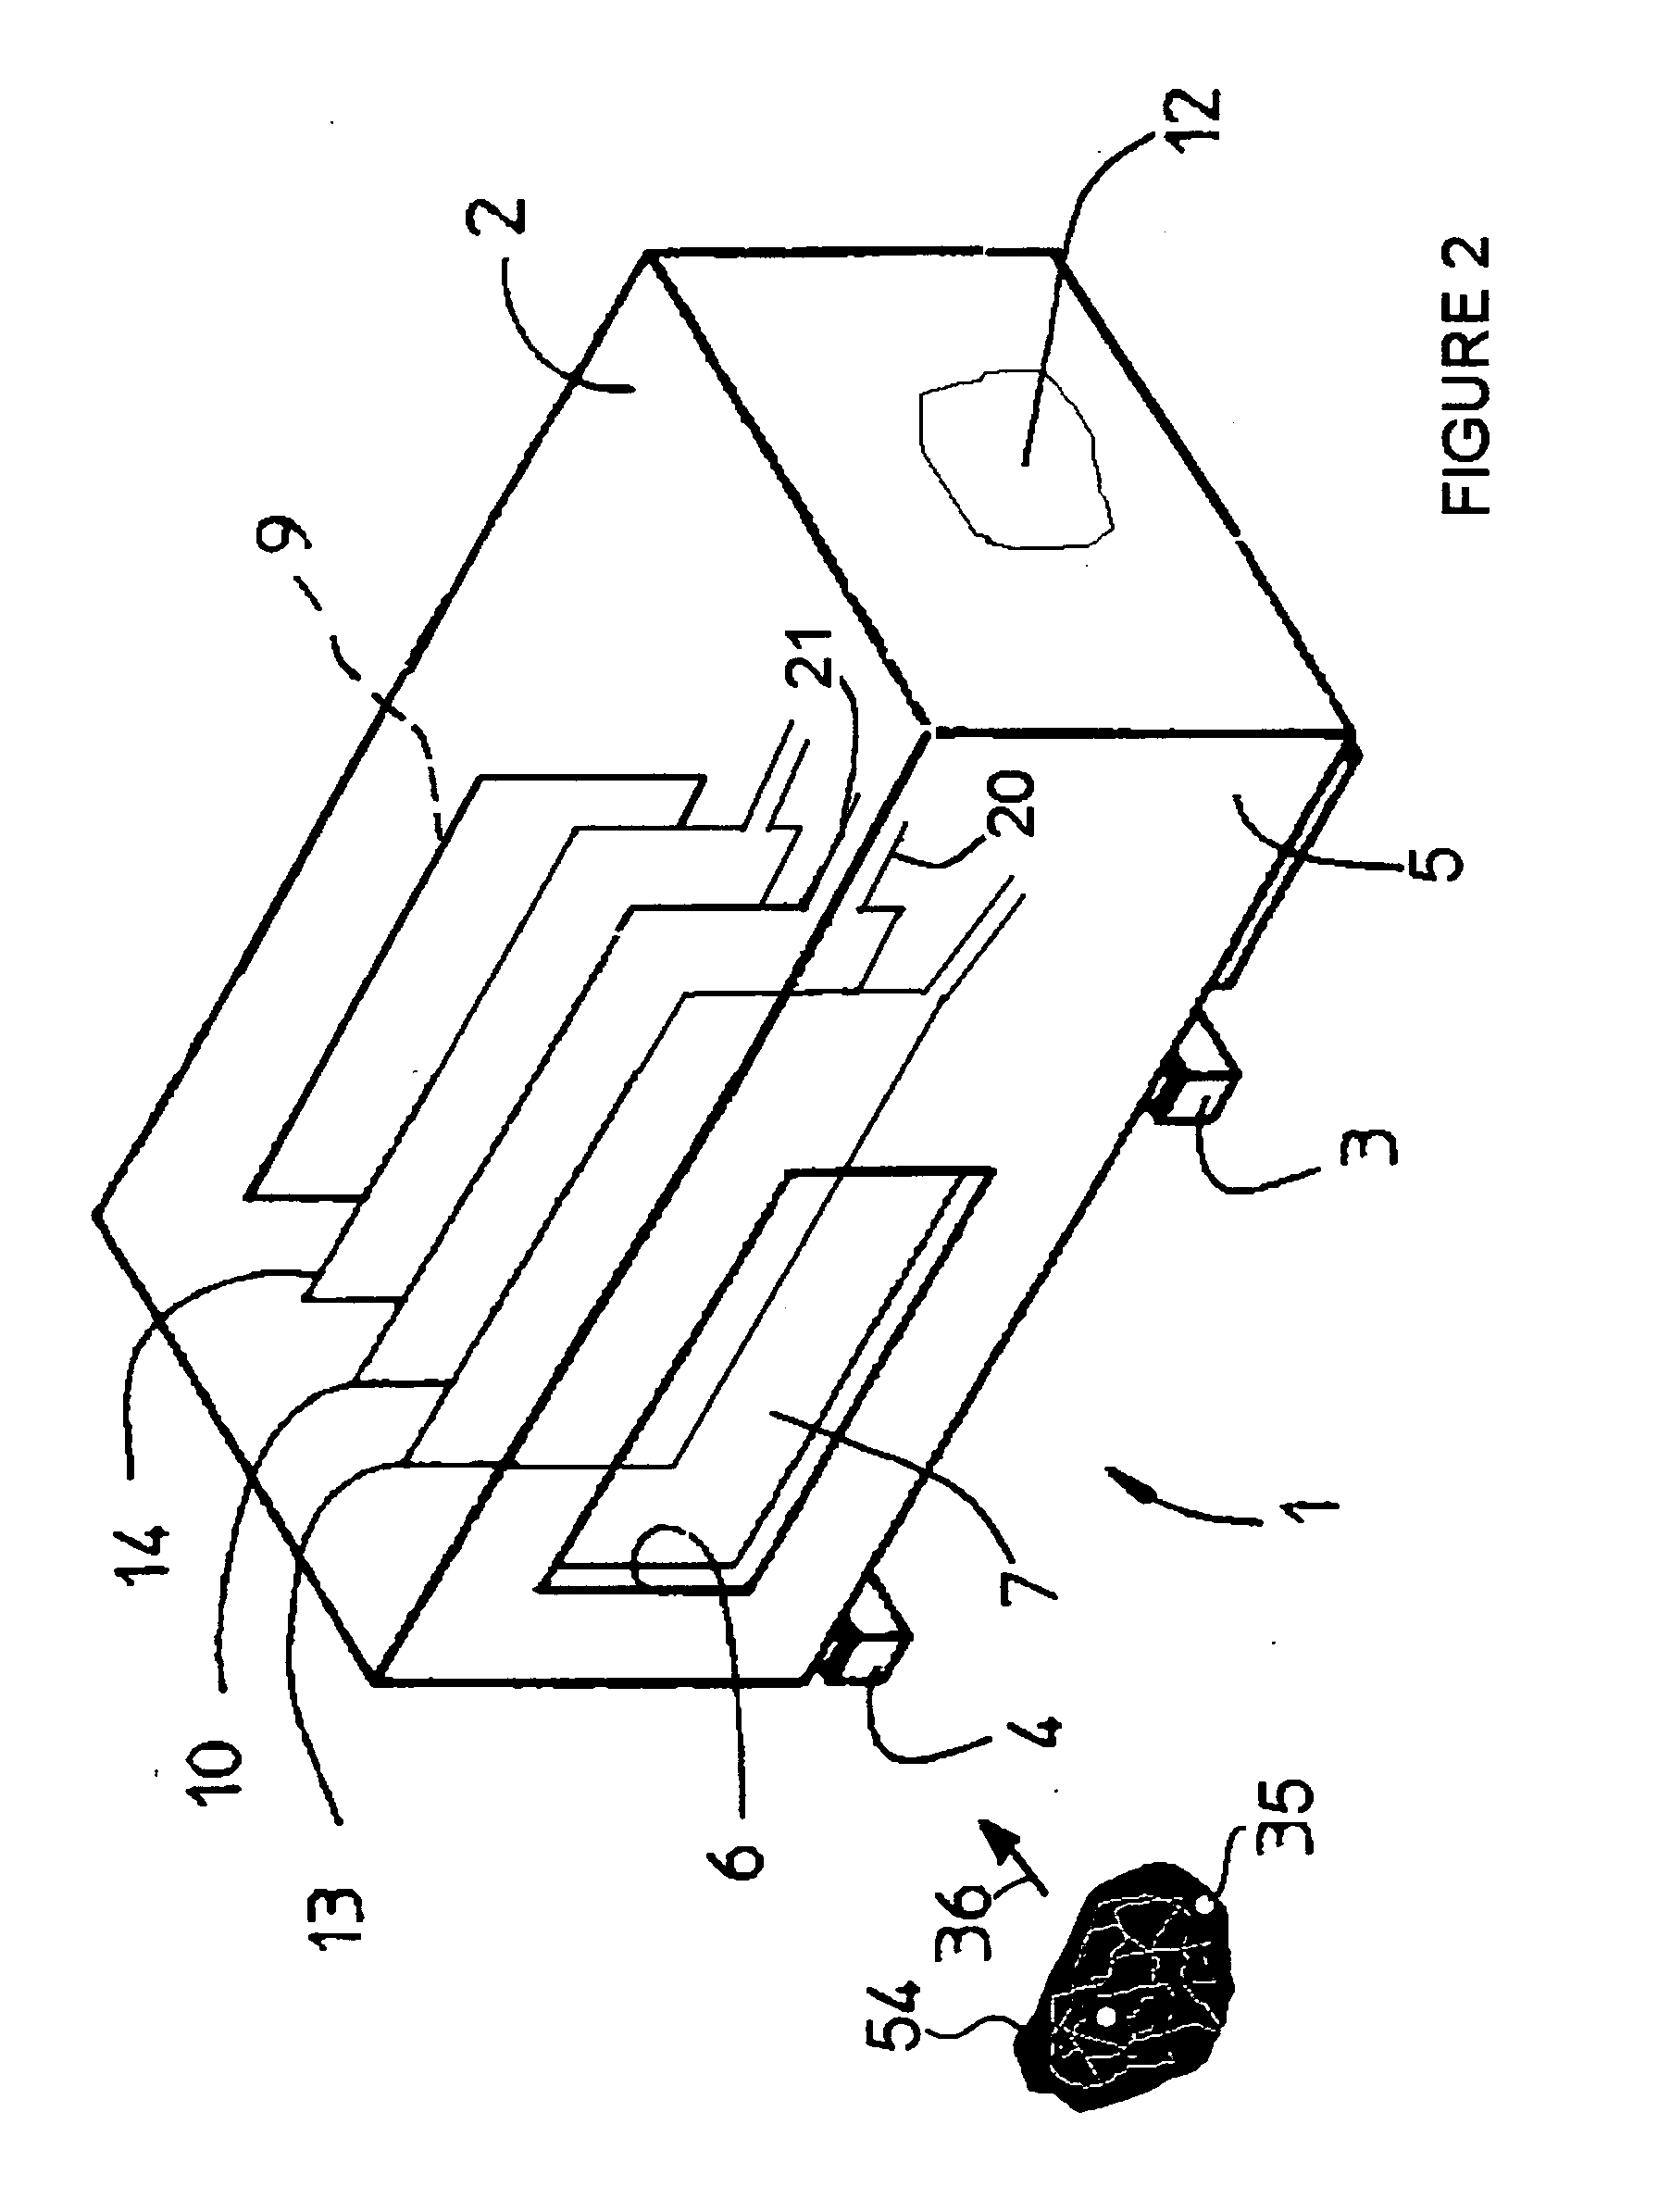 Oscillator coil geometry for radio frequency metal detectors